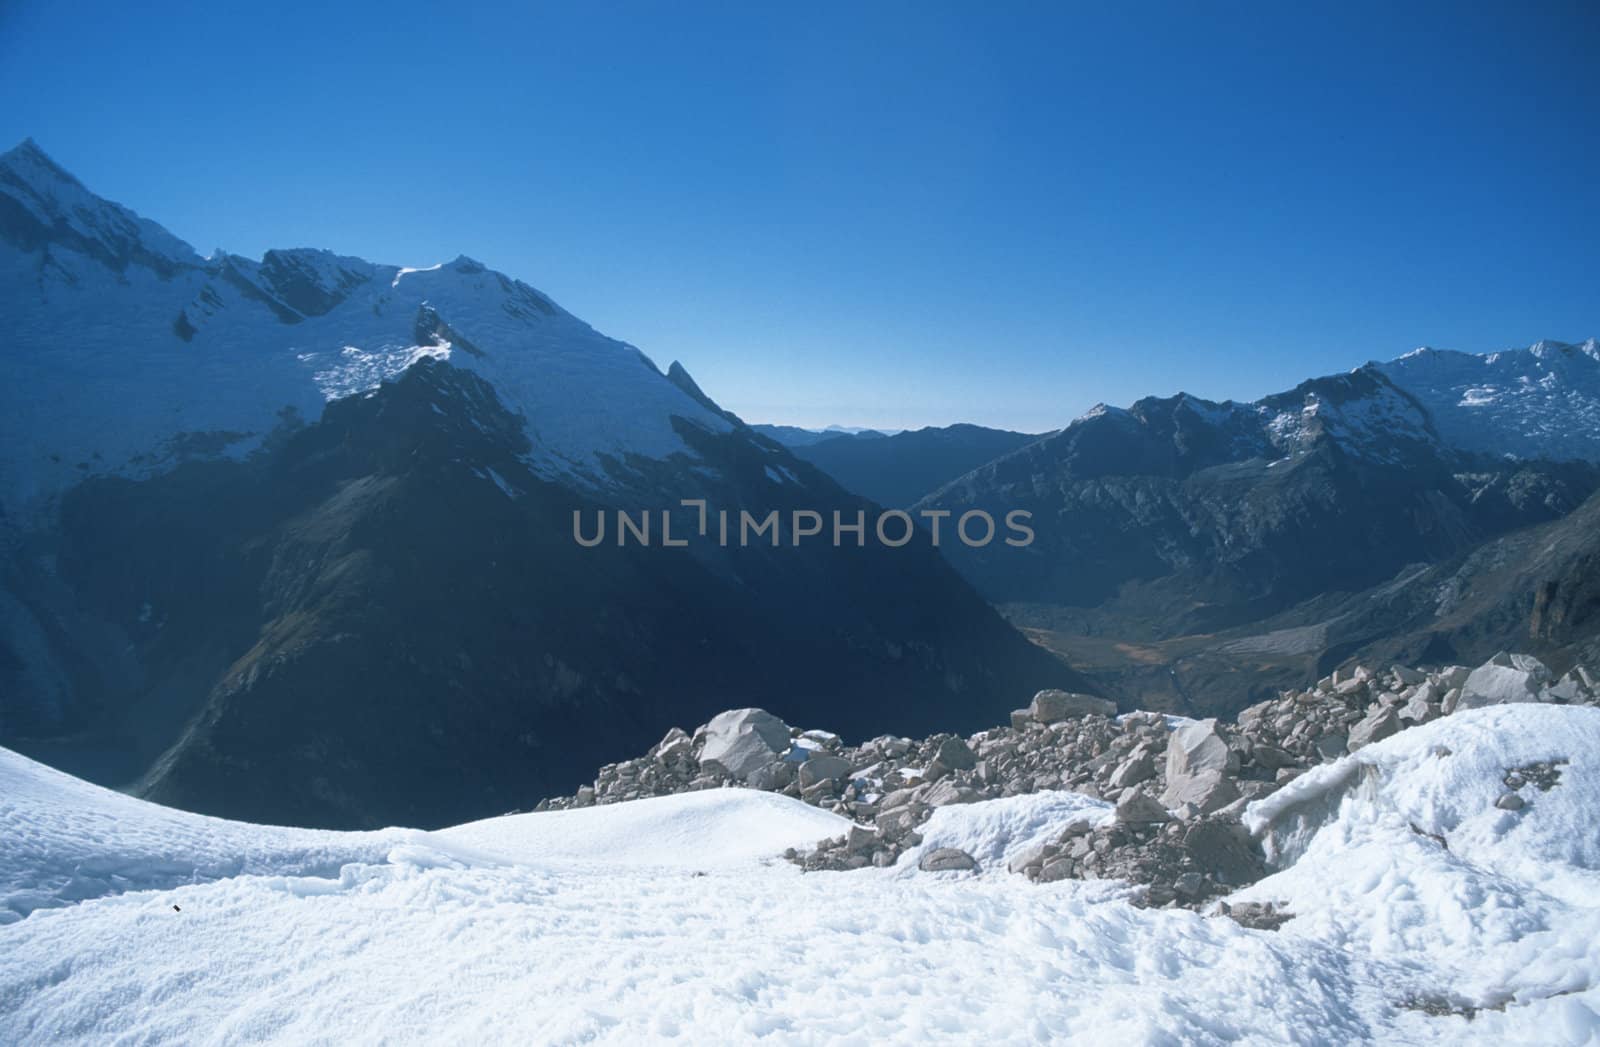 Landscape of beautiful snowy Andes Mountains in Peru